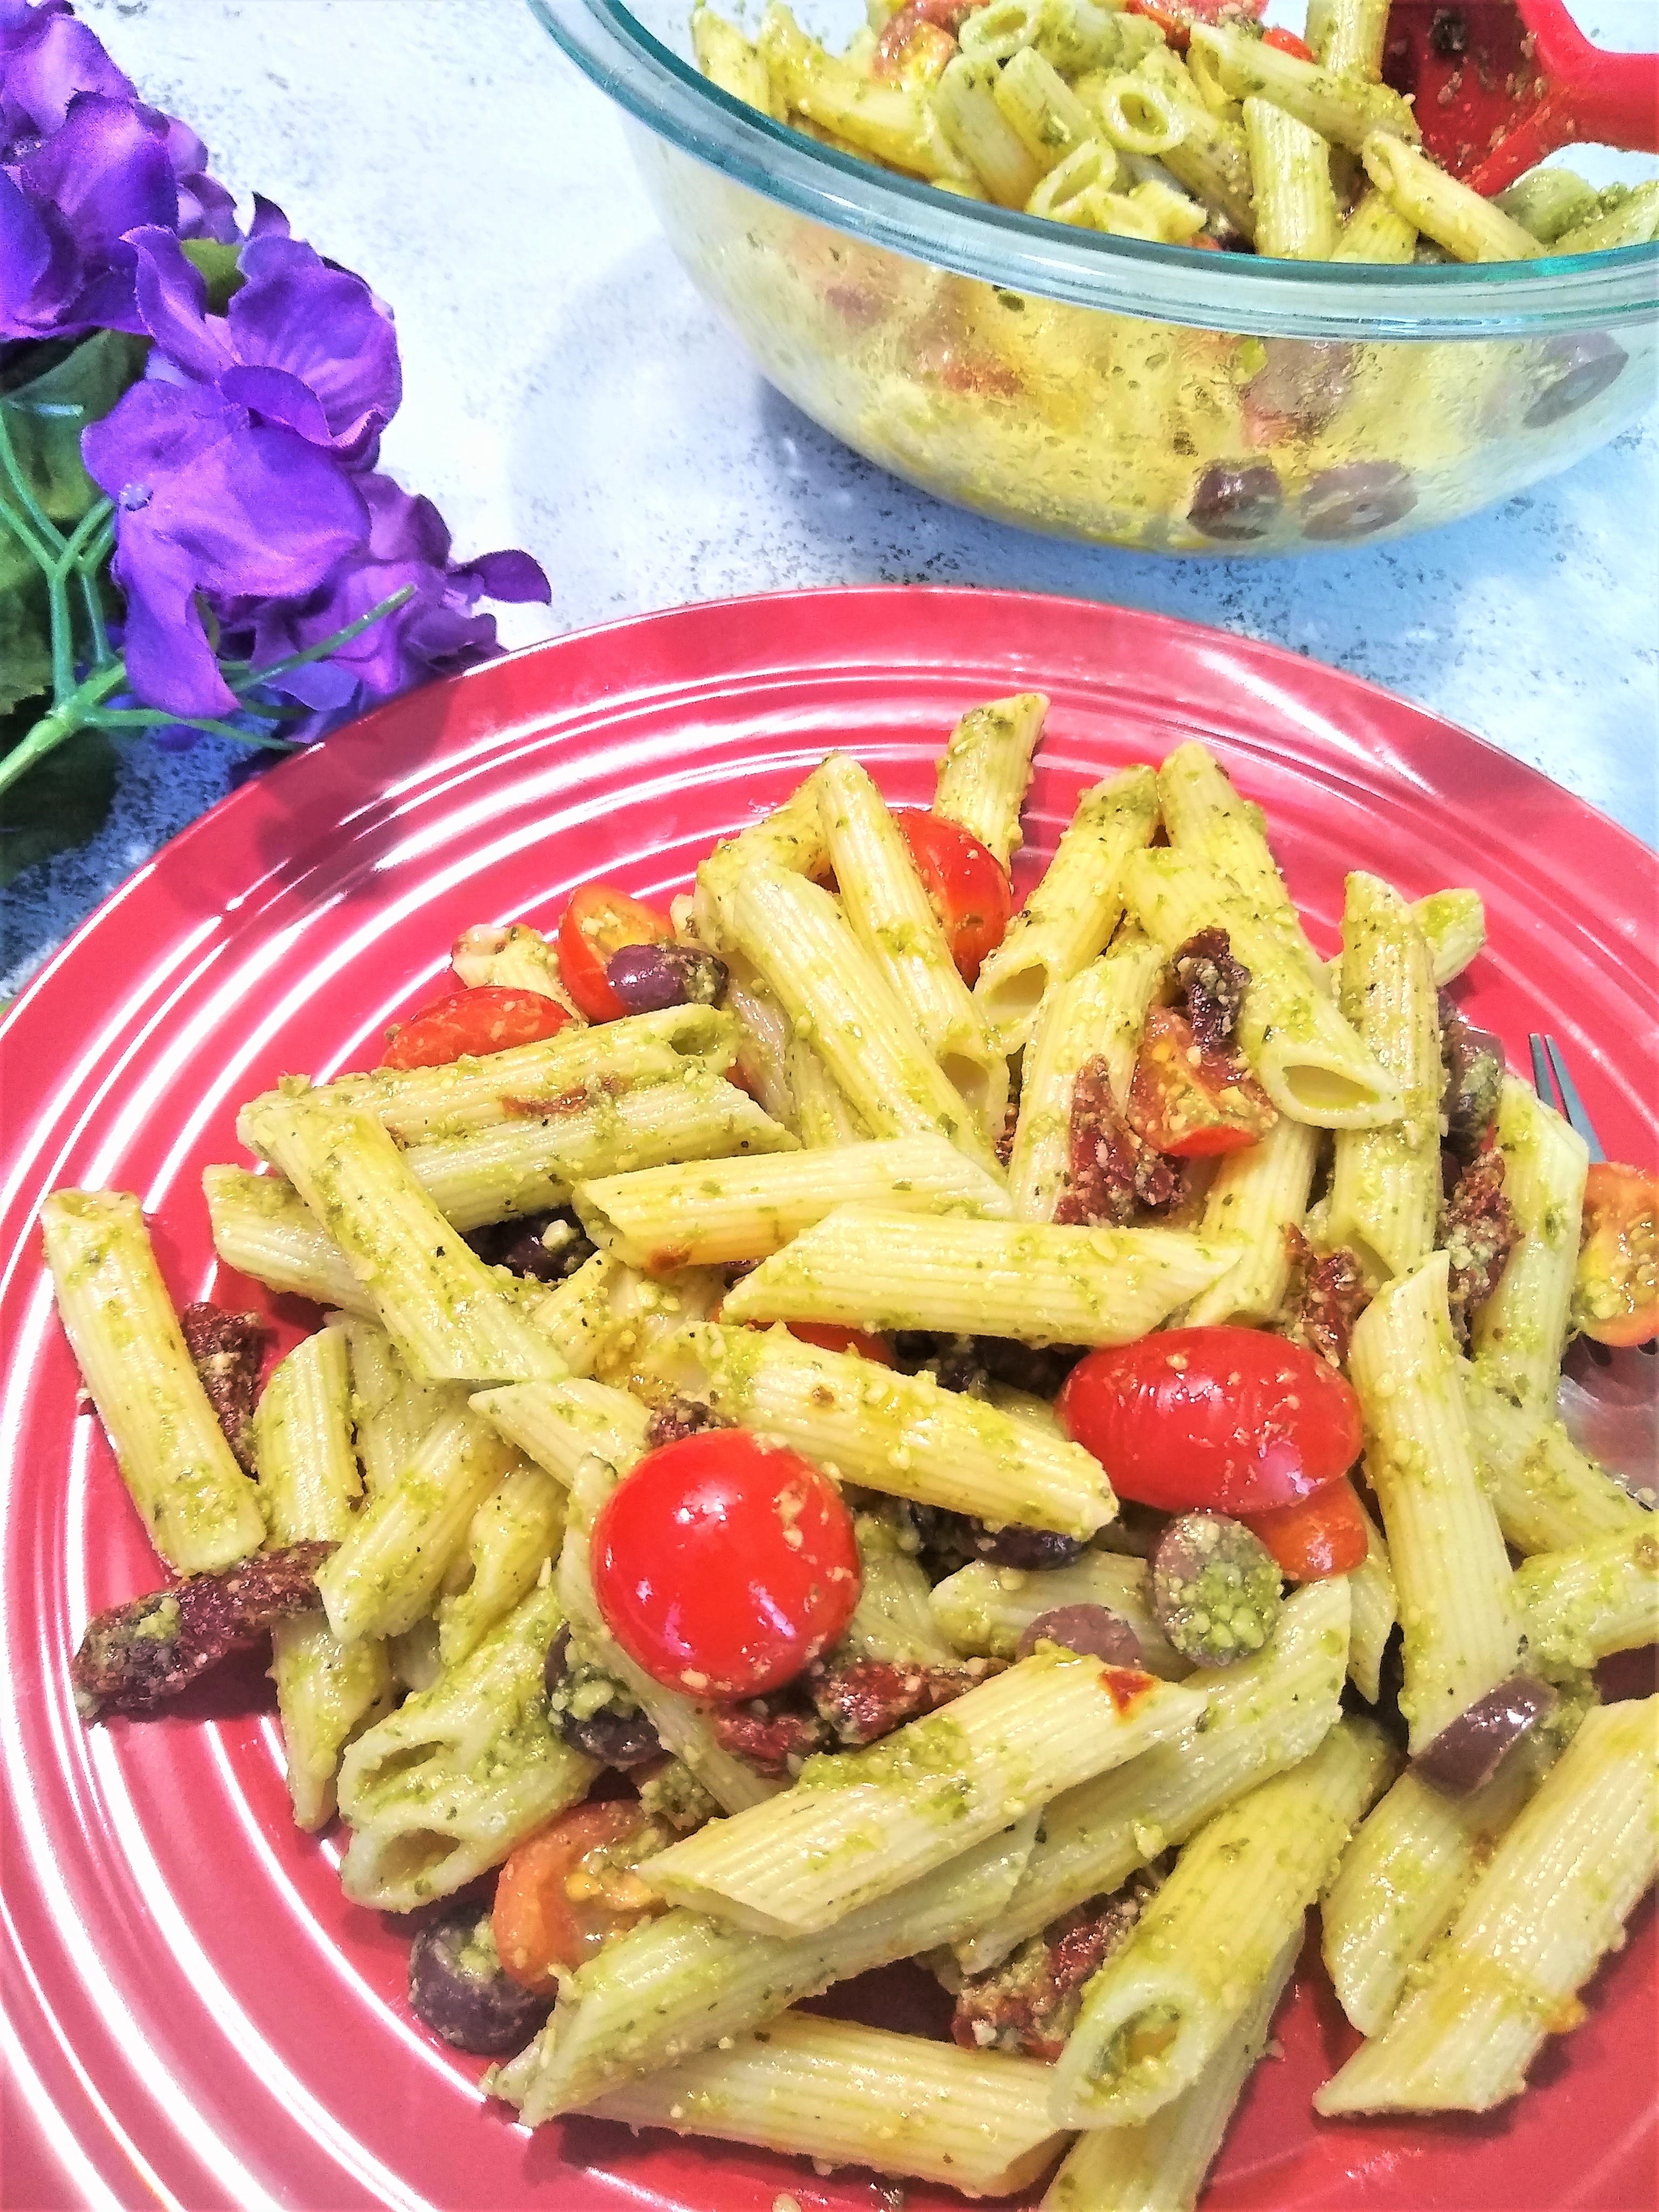 Pesto Pasta with tomatoes and olives